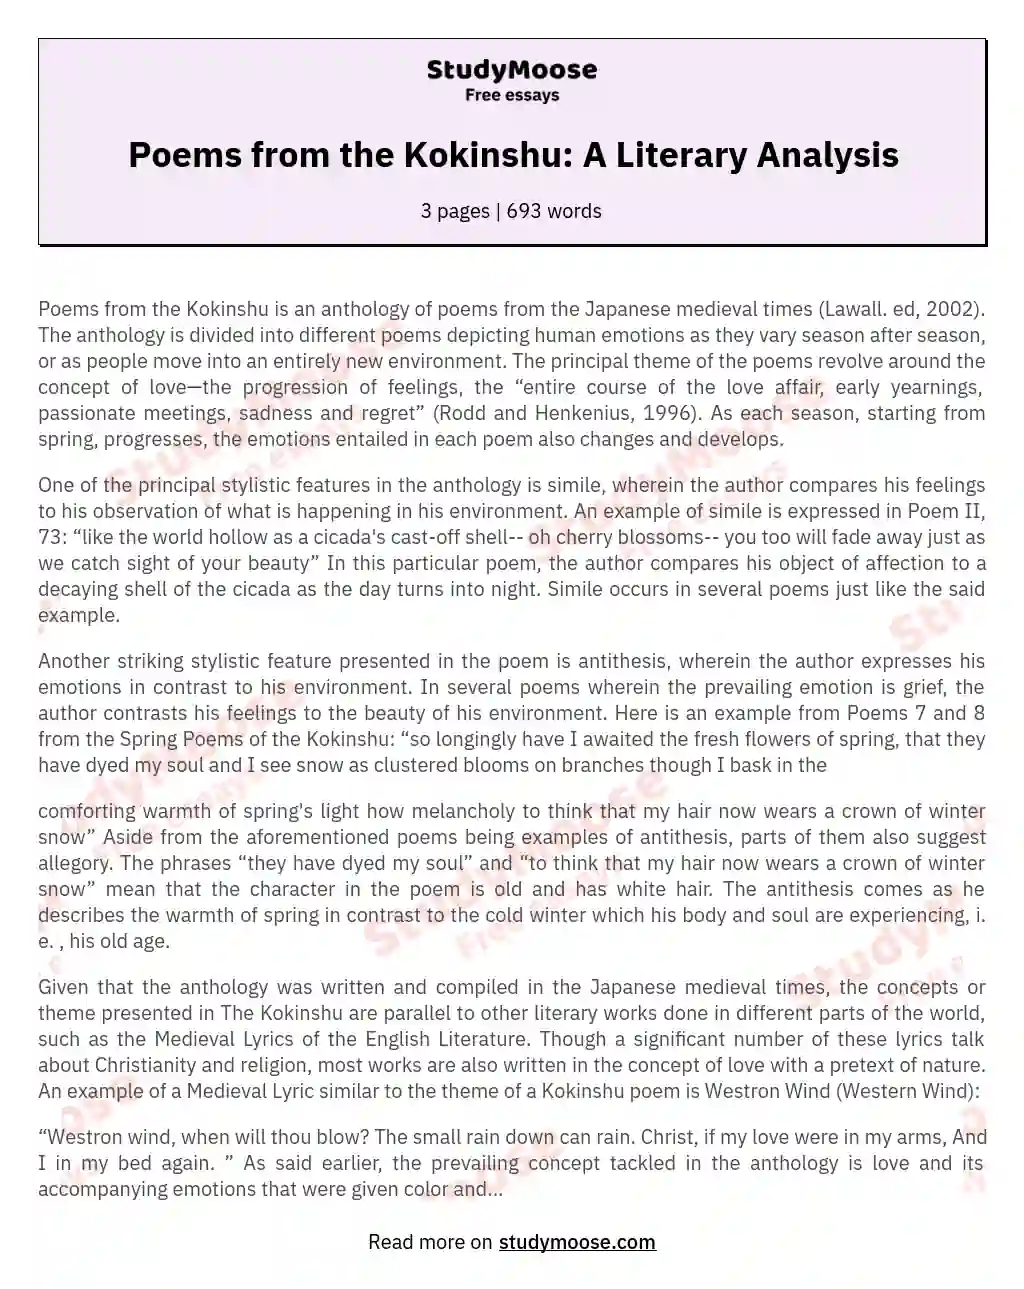 Poems from the Kokinshu: A Literary Analysis